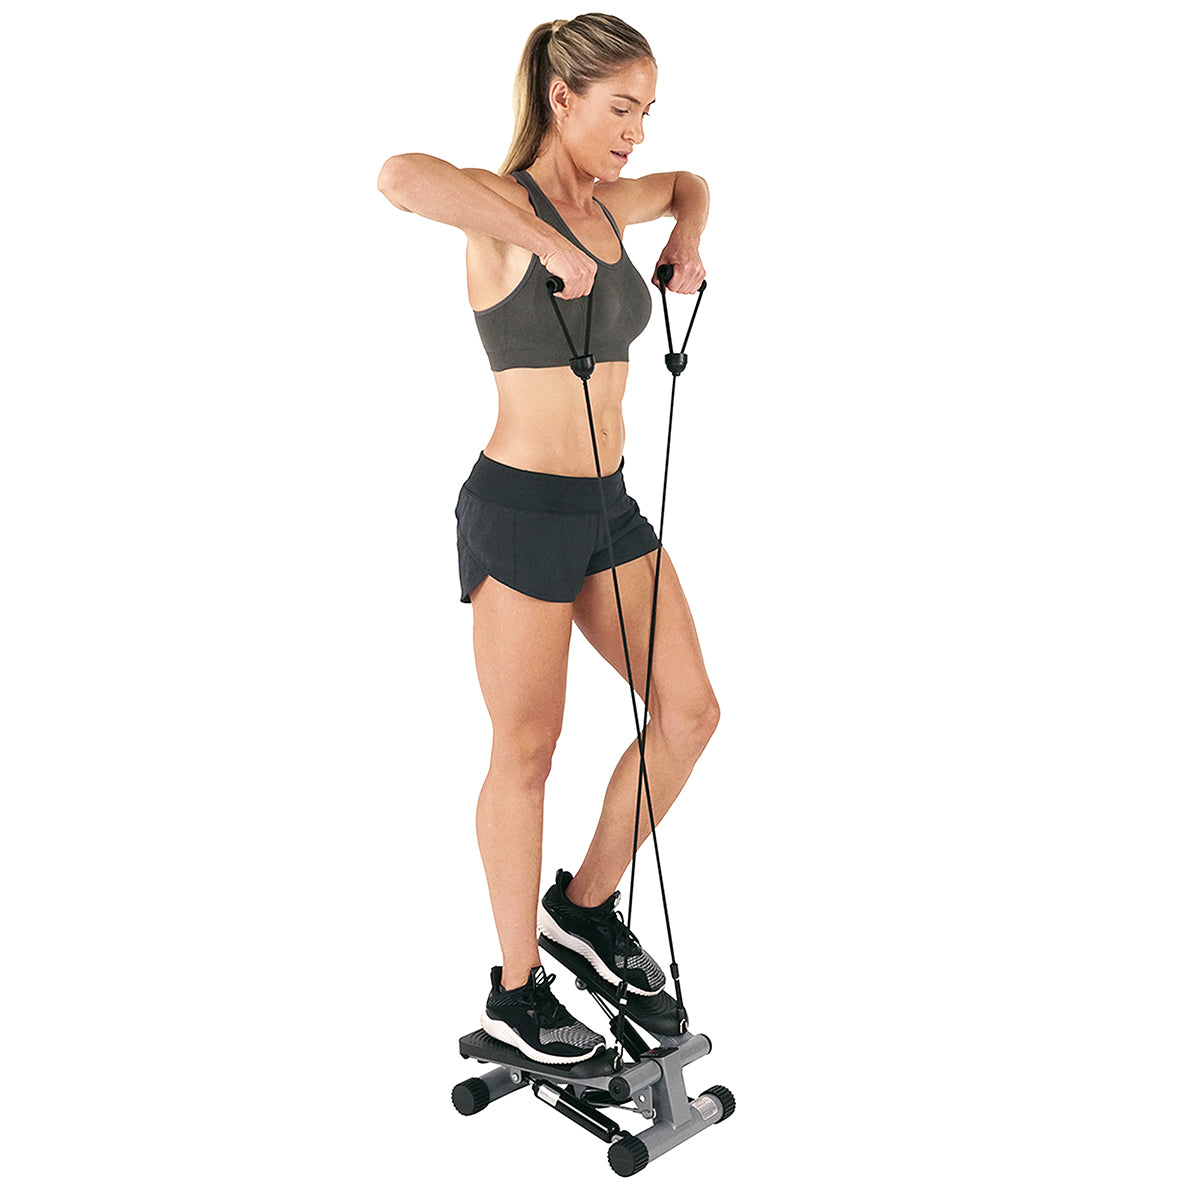 Mini Stepper With LCD Monitor Portable Fitness Exercise Equipment